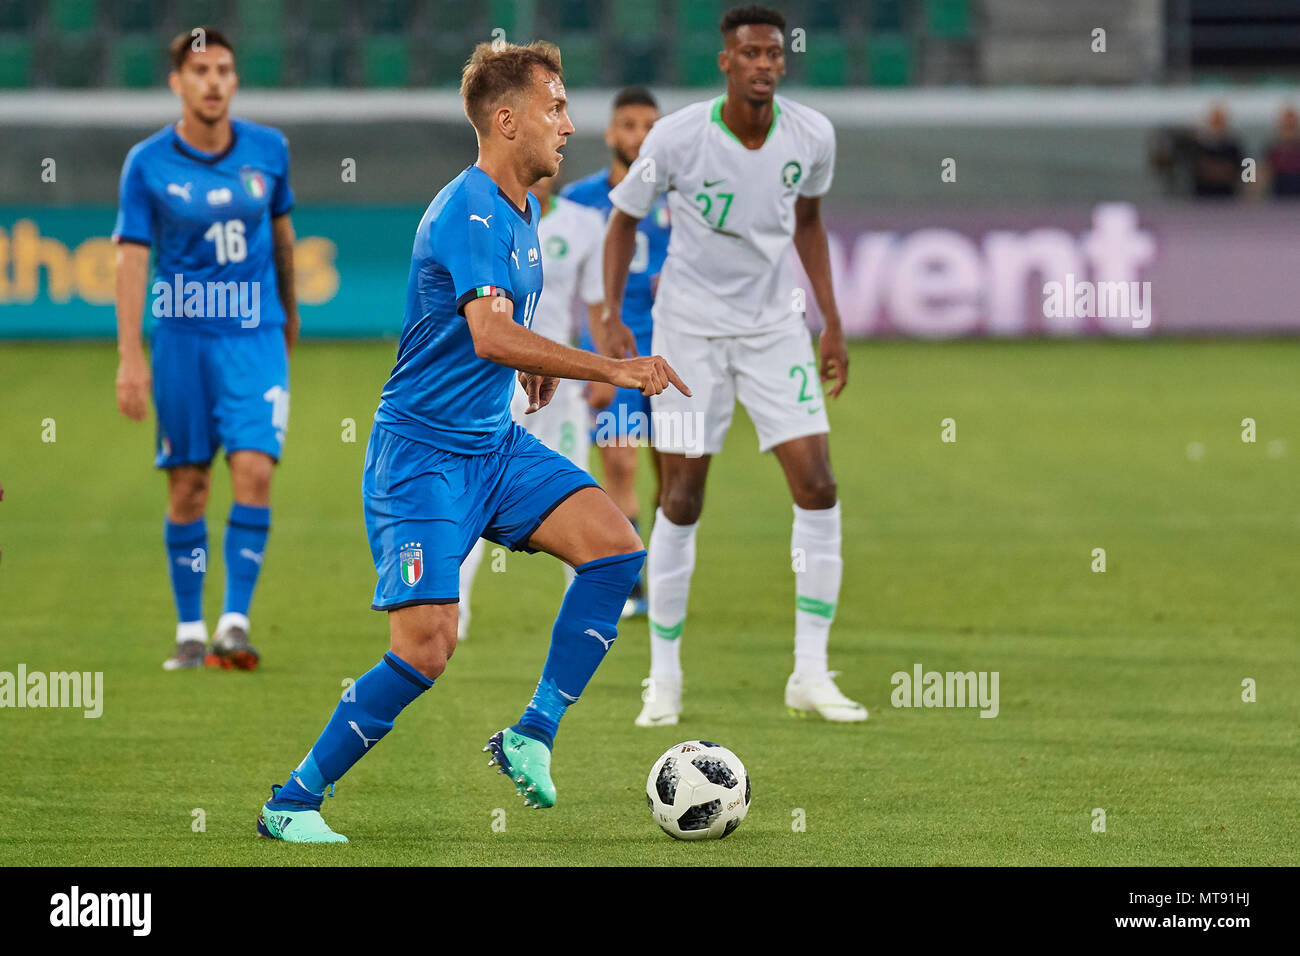 St. Gallen, Switzerland. 28th May 2018. Domenico Criscito during the football World Cup 2018 preparation match Italy vs. Saudi Arabia in St. Gallen. The national team from Saudi Arabia is using the game to prepare for the 2018 FIFA World Cup final tournament in Russia while Italy did not qualify for the World Cup finals. Stock Photo